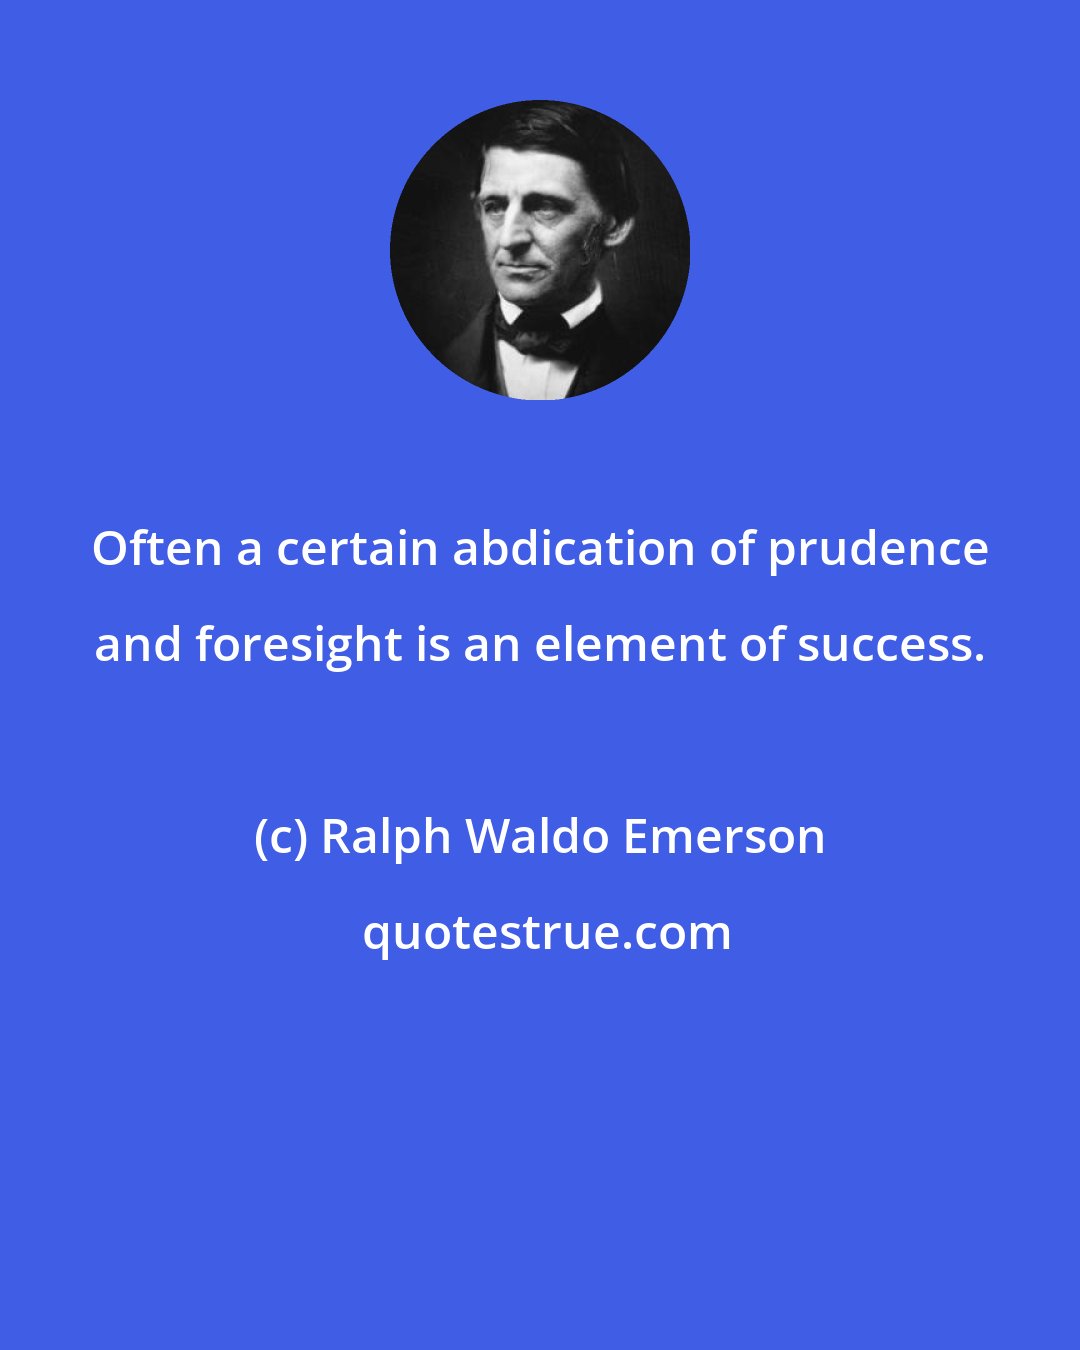 Ralph Waldo Emerson: Often a certain abdication of prudence and foresight is an element of success.